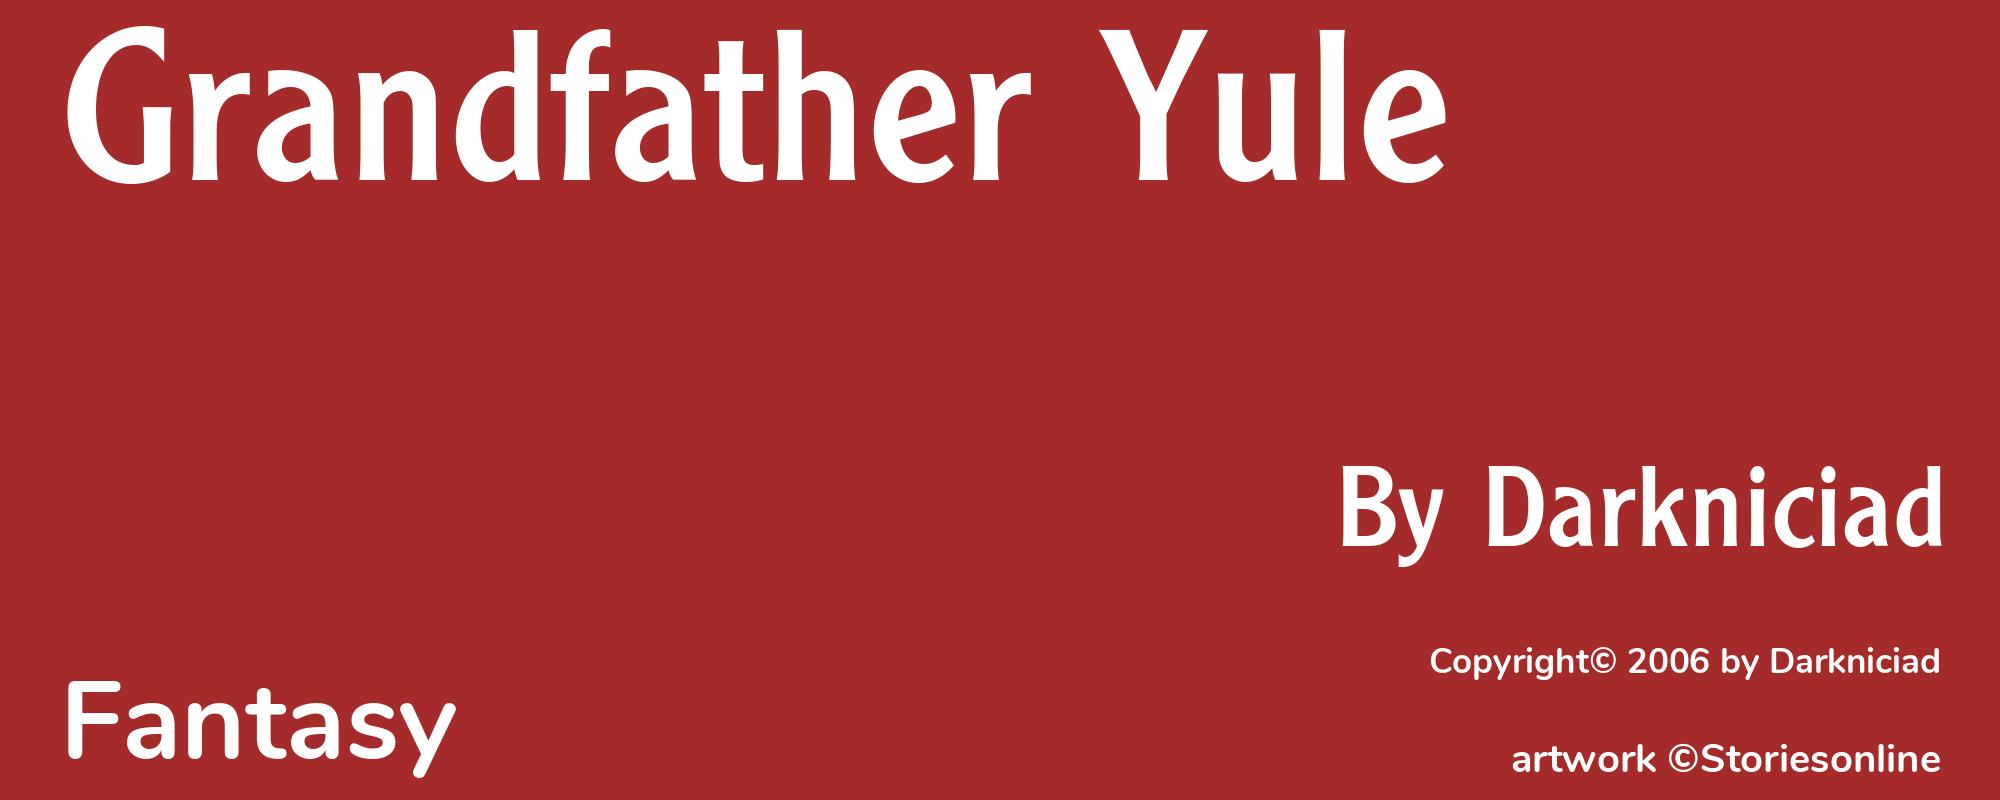 Grandfather Yule - Cover